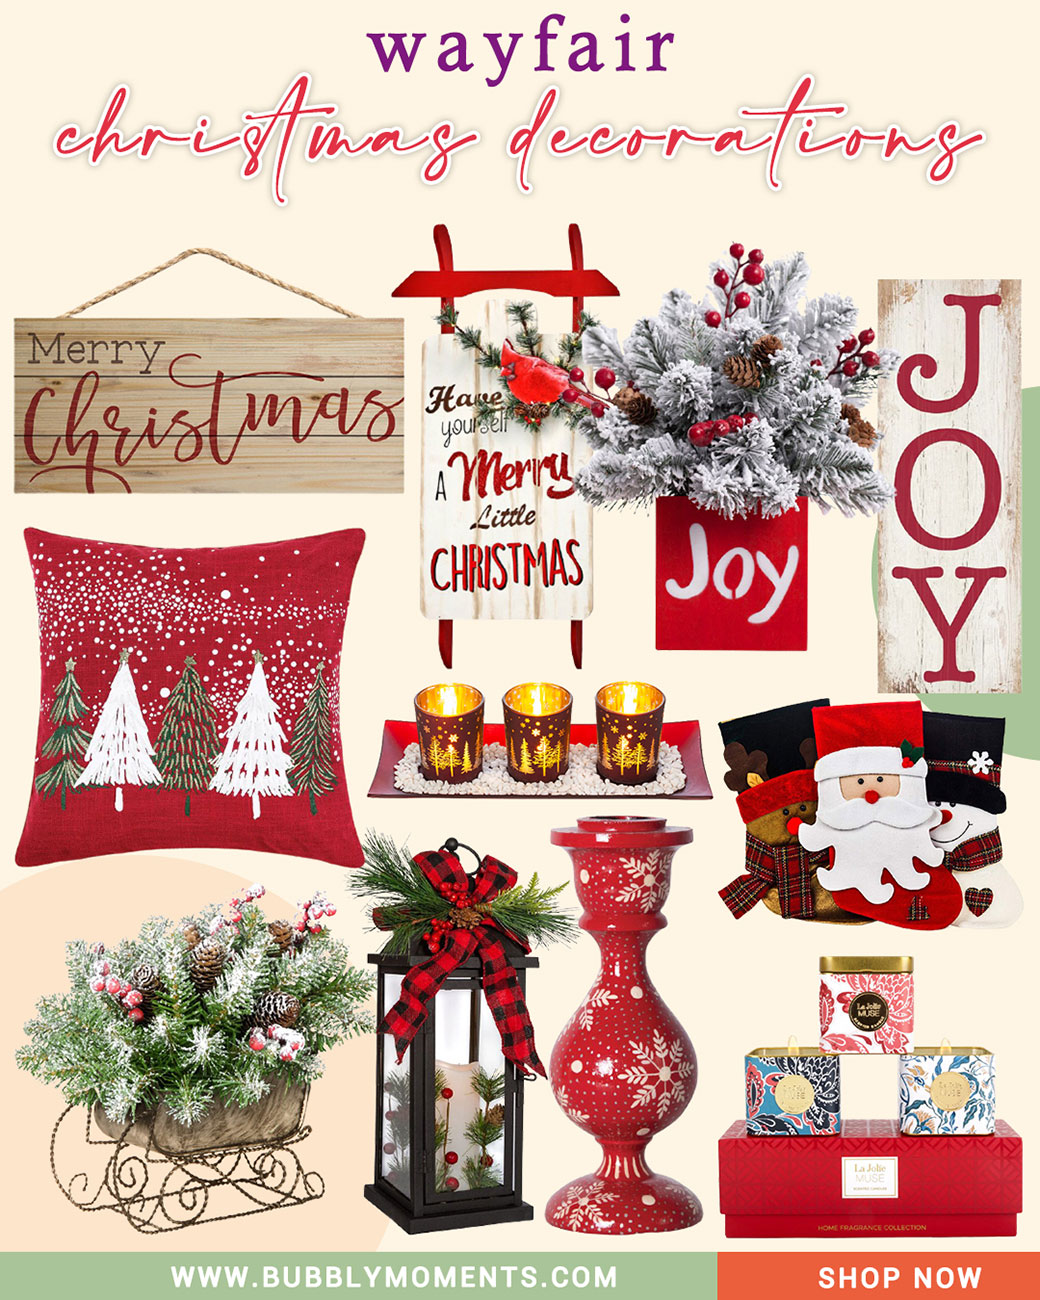 Christmas décor | Christmas Candle | Lanterns | Decorative Letters | Holiday Decor | Christmas Banner | Christmas Pillow | Seasonal Decor | Christmas Setup | Home Decor | Accessories | Bubbly Moments